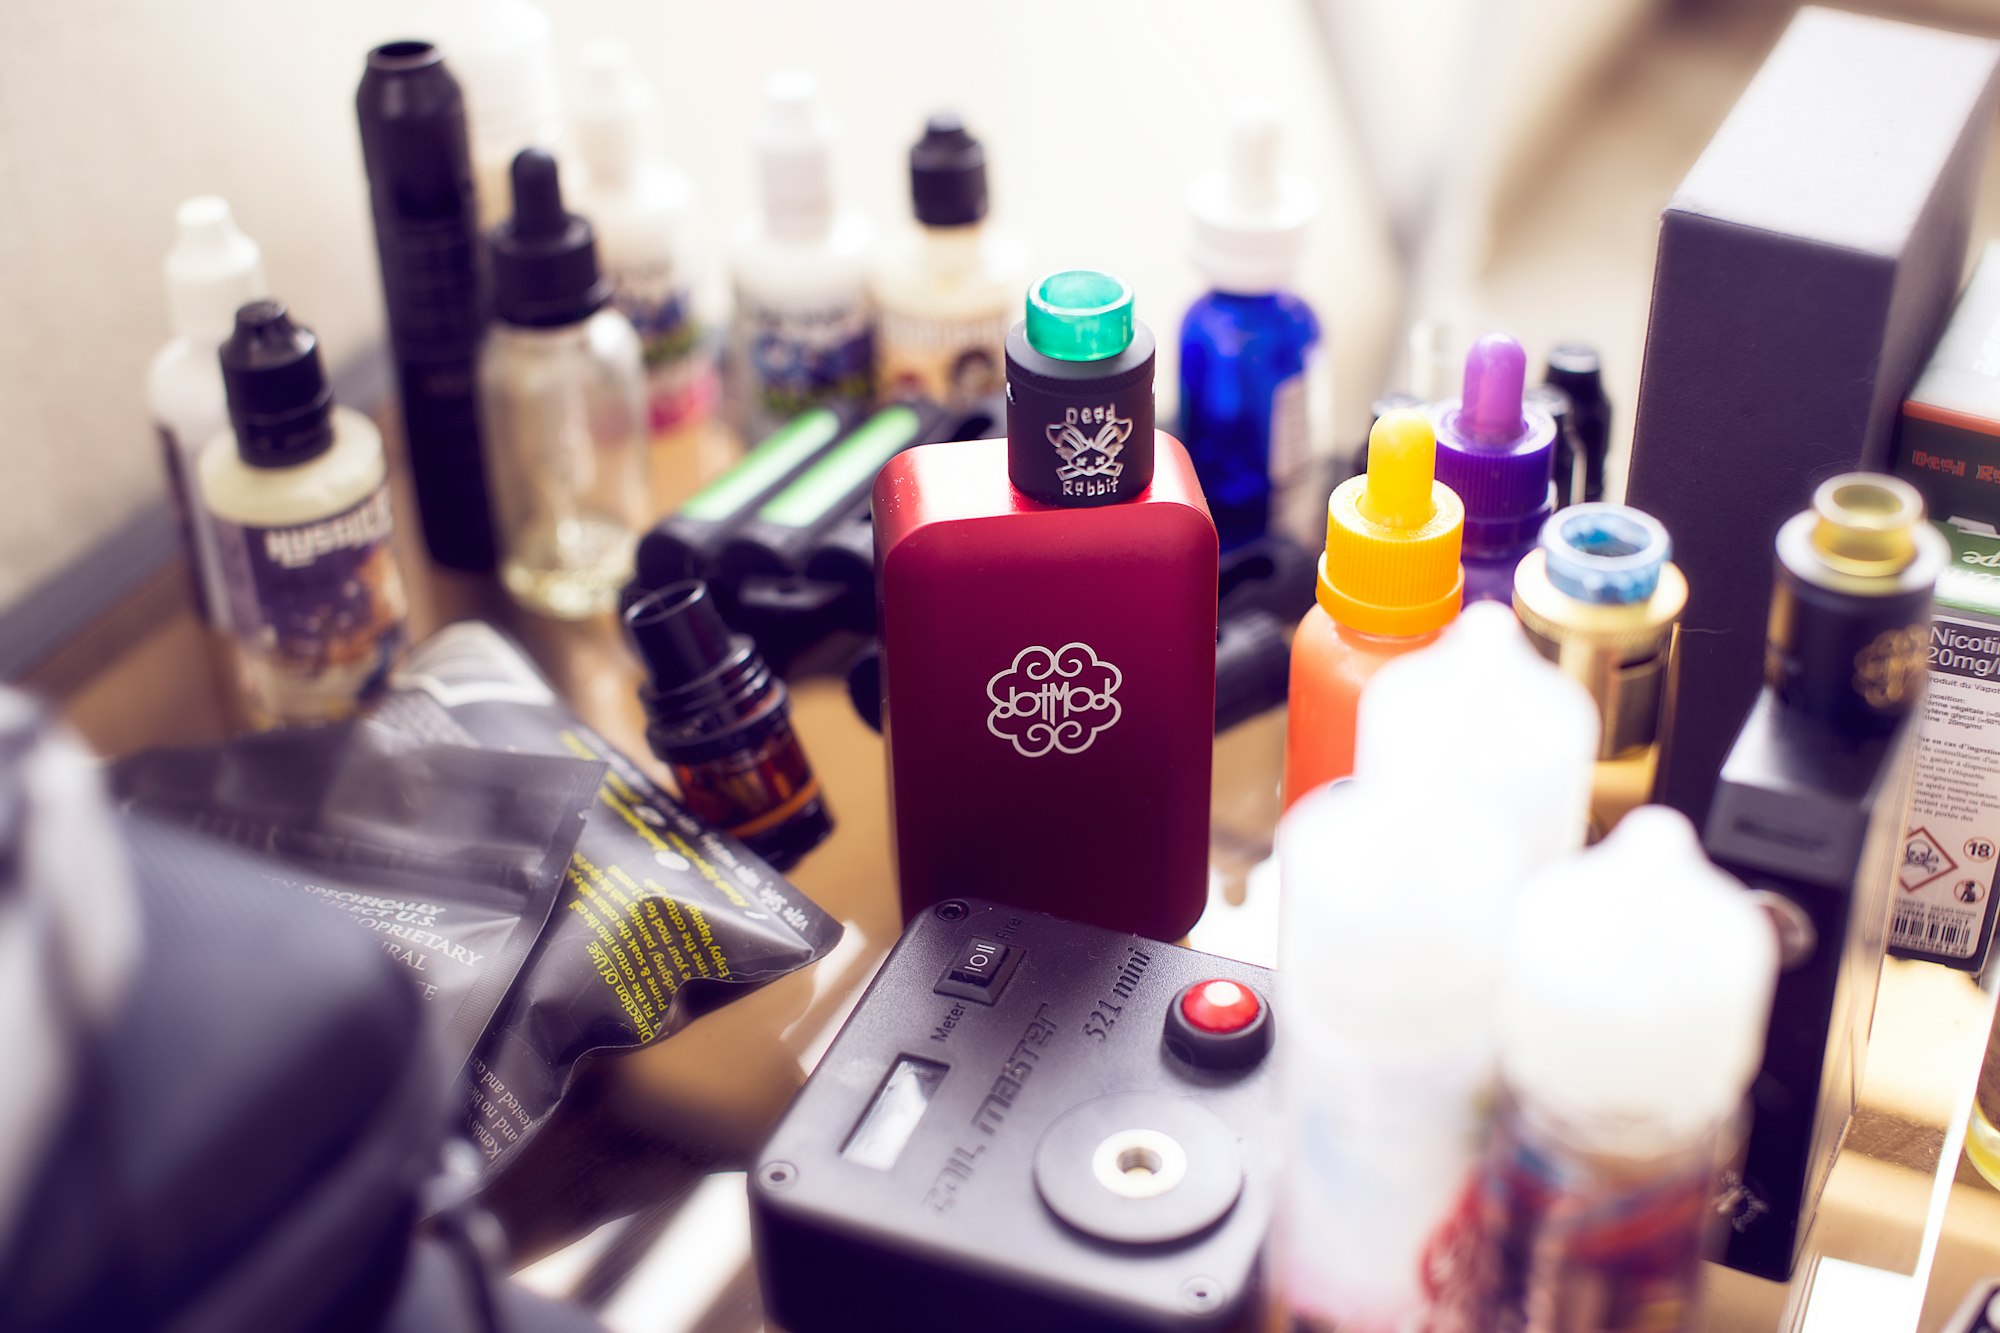 Quick shot of my table while we setup the photoshoot for our website Vapeblog. In the center, you can admire my fresh new electro box from dotmod along with a bunch of eliquids.